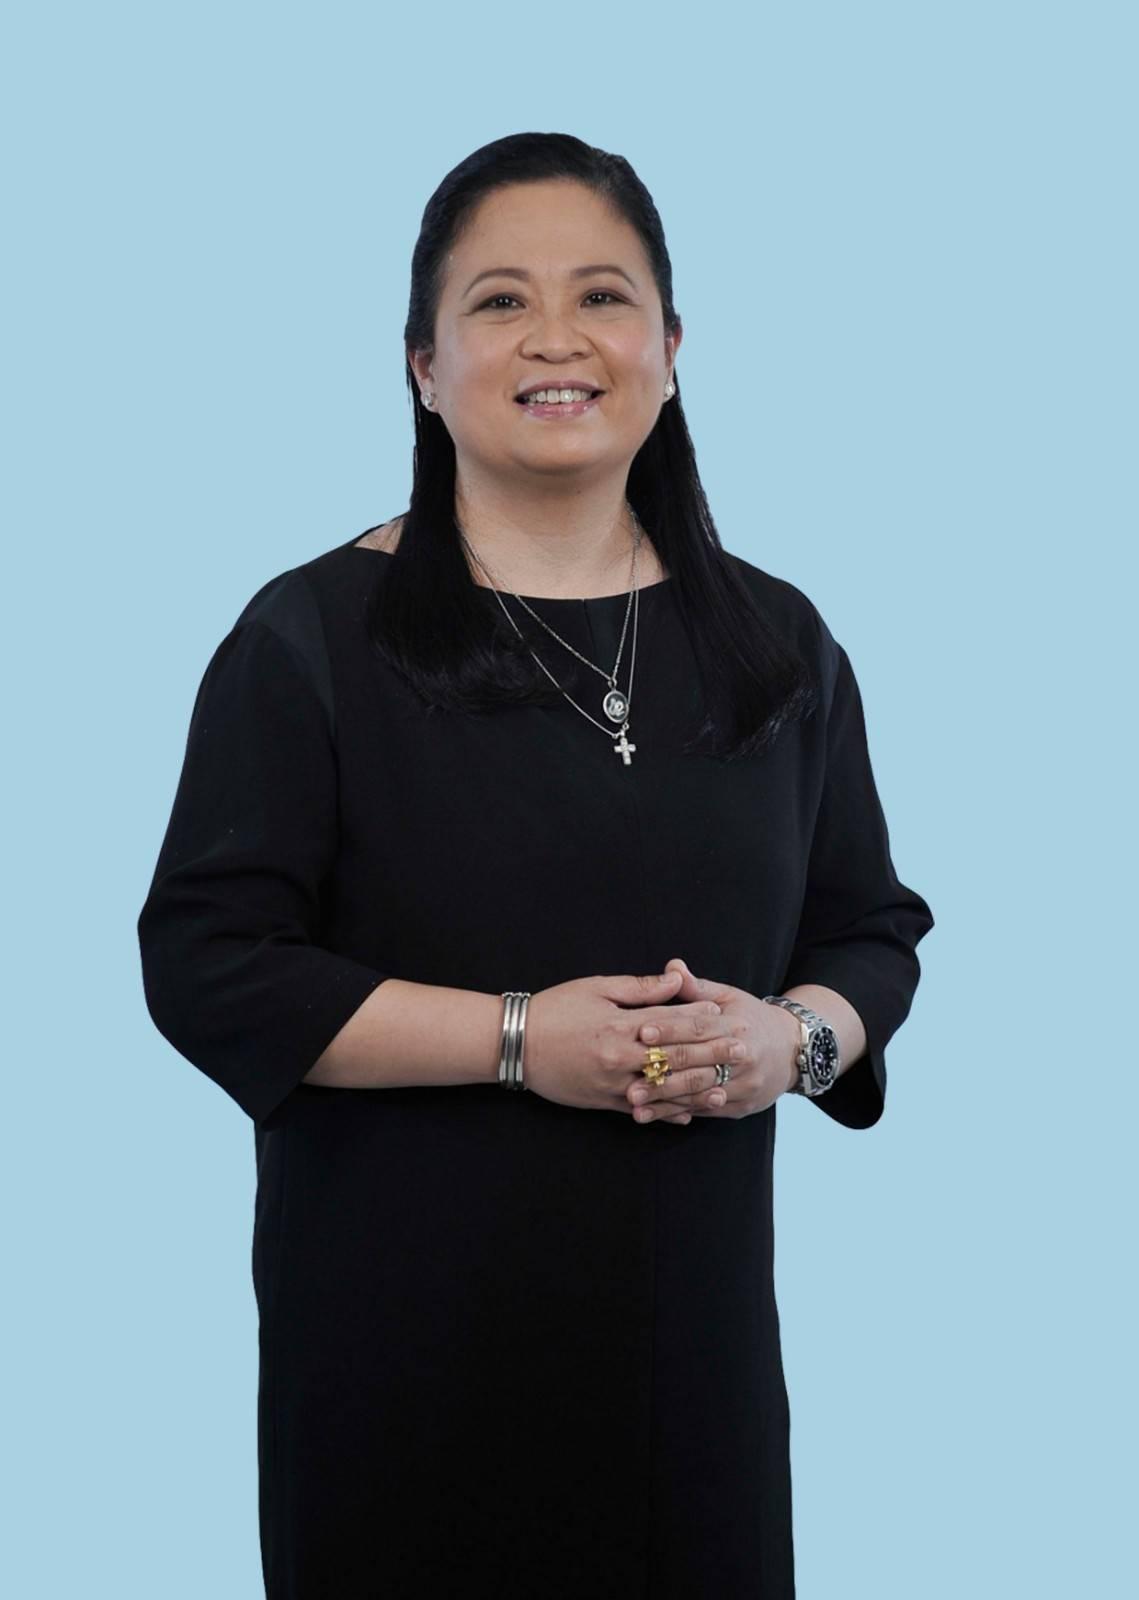 GMA Network Chief Marketing Officer Lizelle G. Maralag